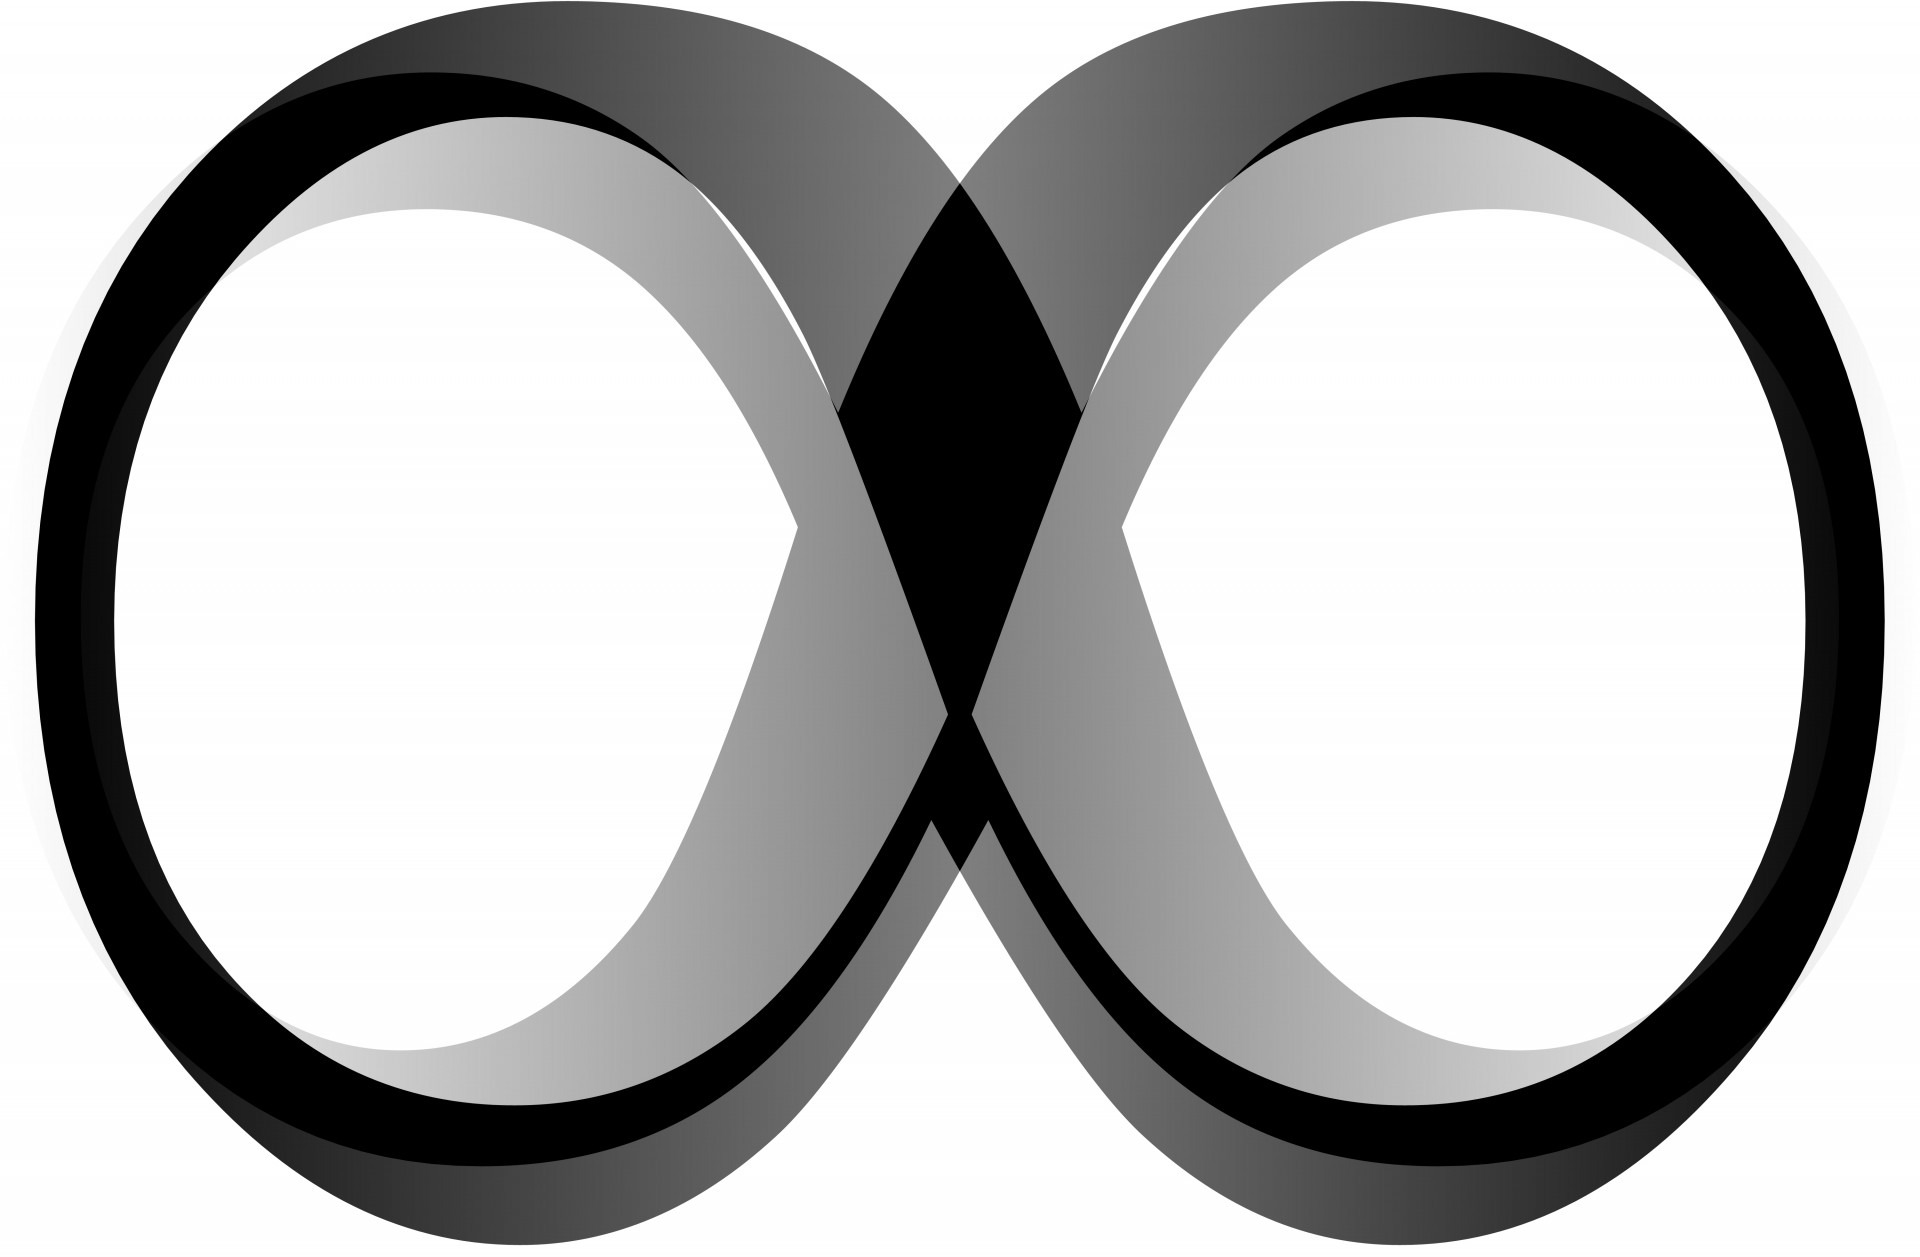 Infinity symbol - Switch to VoIP and Get Unlimited Calling